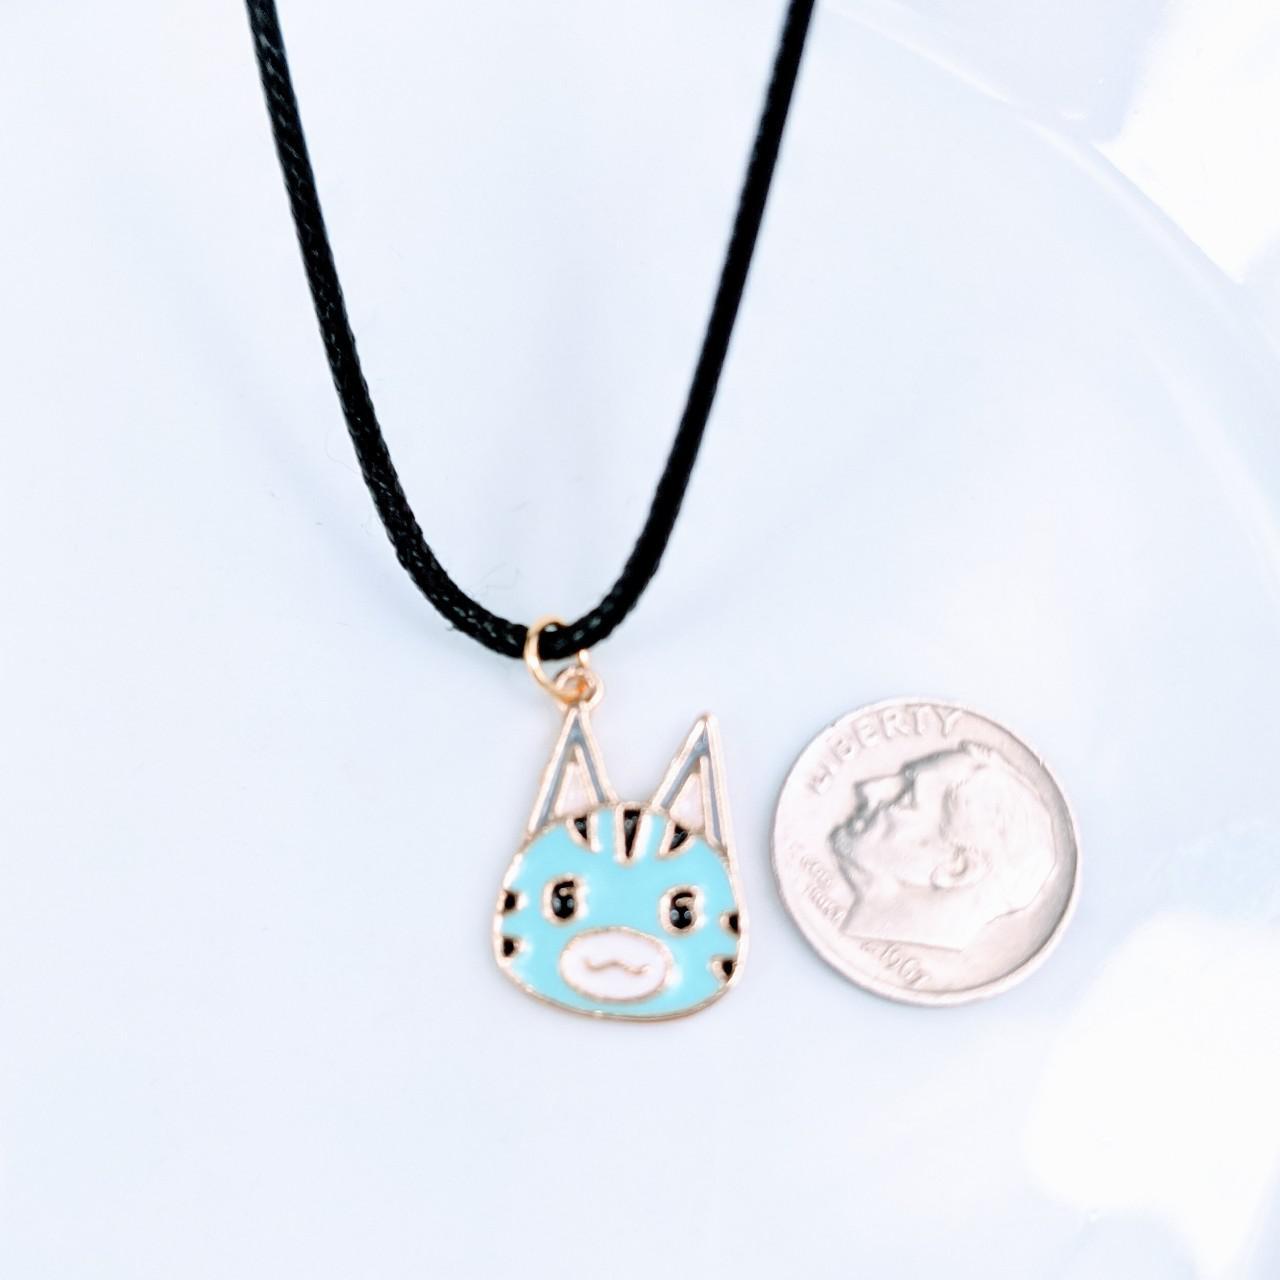 Product Image 2 - Animal Crossing Cat Necklace
Brand new.